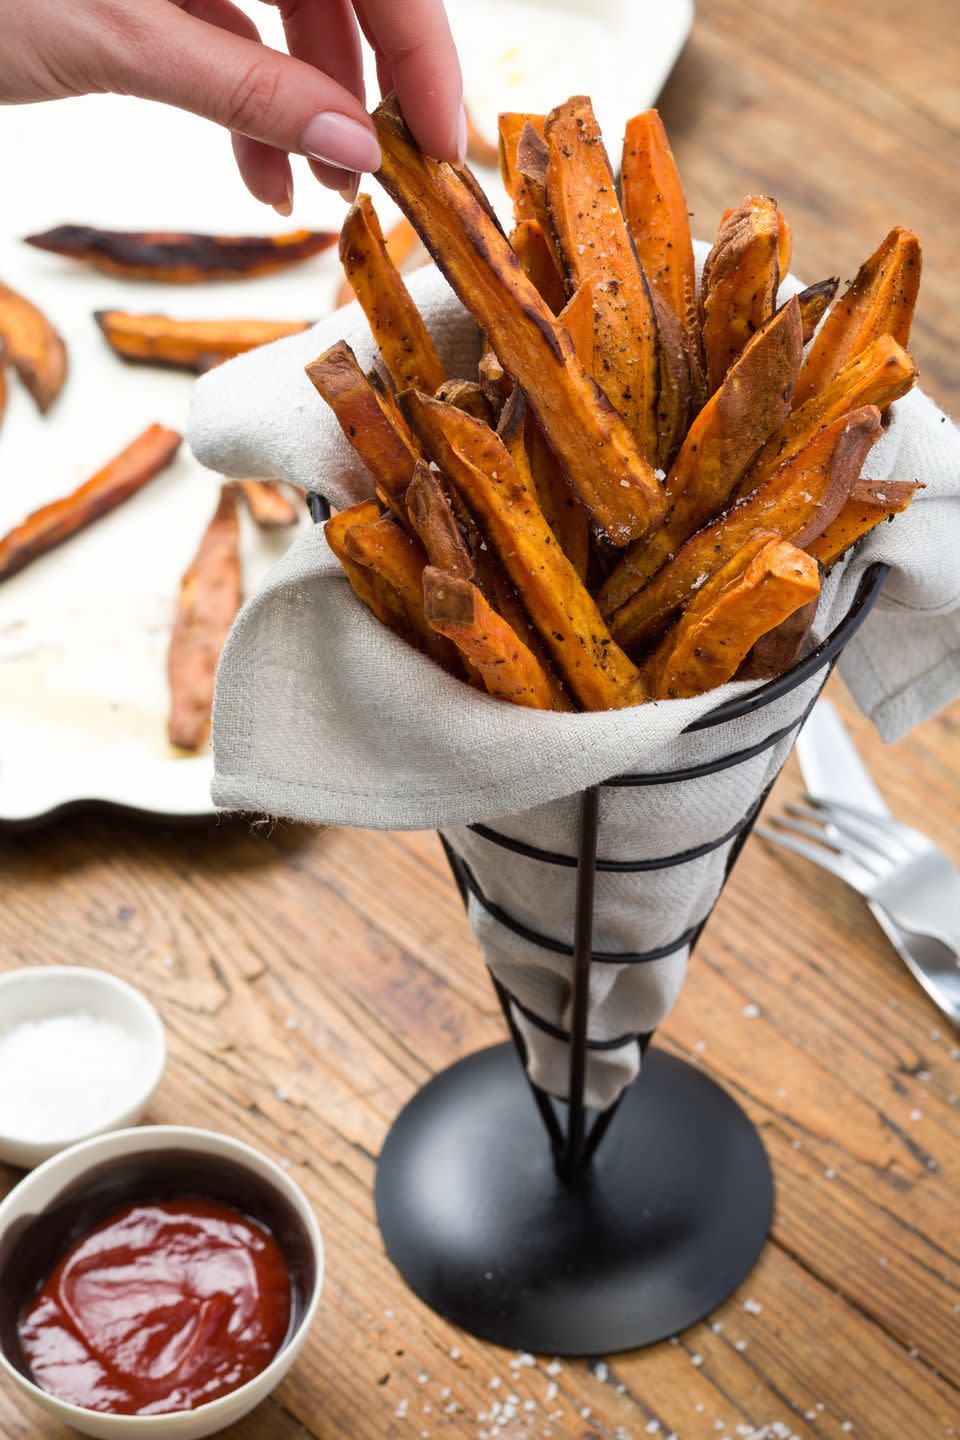 <p>Sweet potato fries beat <a href="https://www.delish.com/cooking/recipe-ideas/a23361078/how-to-make-french-fries/" rel="nofollow noopener" target="_blank" data-ylk="slk:French fries" class="link ">French fries</a> any day, and this recipe has a few tricks up its sleeves to get extra-crispy in the oven with no frying in sight! (Hint: A little cornstarch goes a long way.)</p><p>Get the <strong><a href="https://www.delish.com/cooking/recipe-ideas/recipes/a45026/salt-n-pepper-sweet-potato-fries-recipe/" rel="nofollow noopener" target="_blank" data-ylk="slk:Salt 'n' Pepper Sweet Potato Fries recipe" class="link ">Salt 'n' Pepper Sweet Potato Fries recipe</a></strong>.</p>